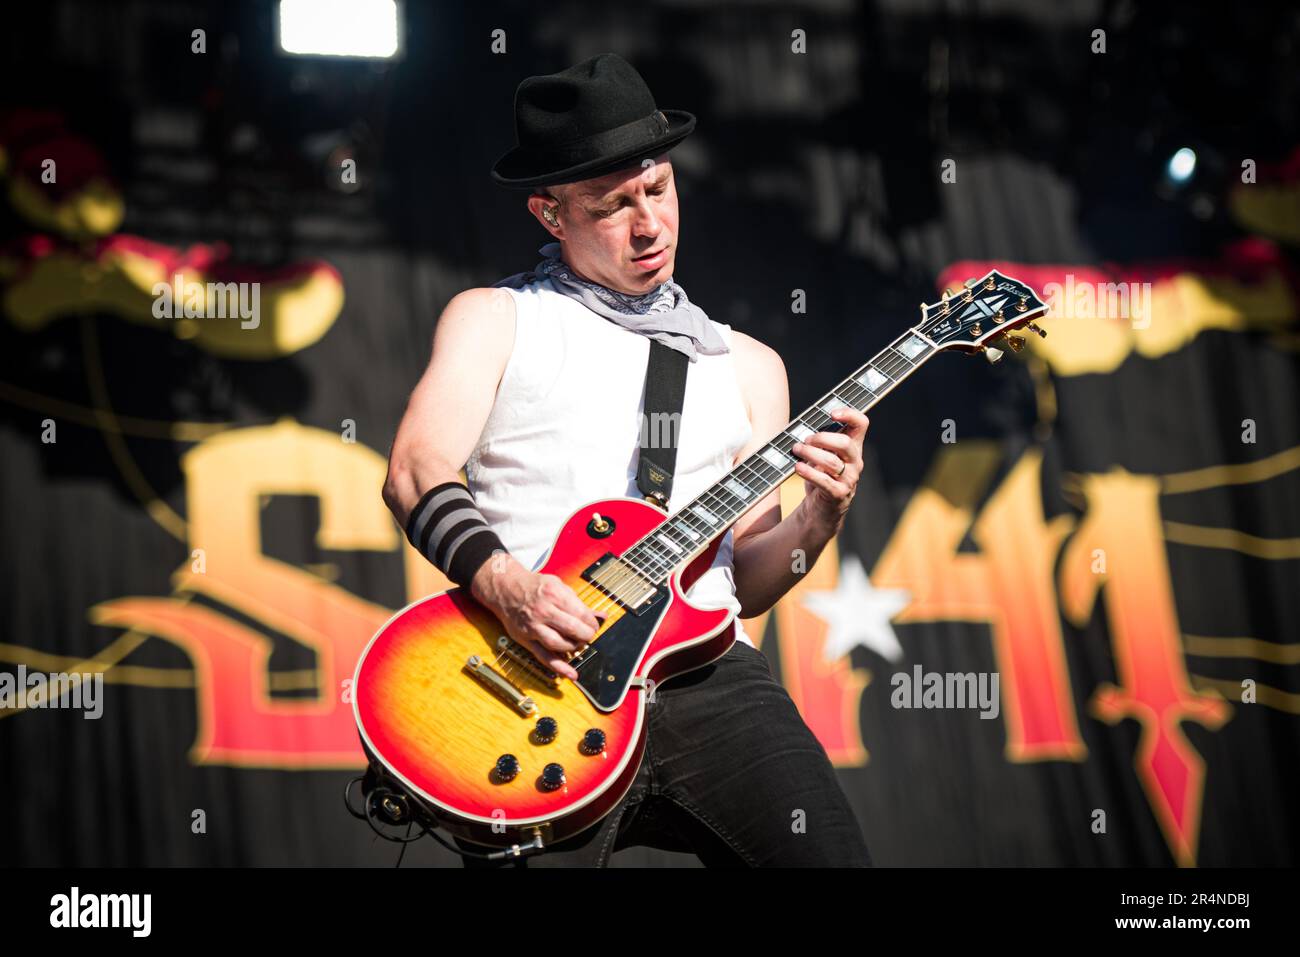 FLORENCE, ITALY, FIRENZE ROCKS FESTIVAL: Thomas William Thacker, guitarist of the Canadian punk rock band SUM41, performing live on stage at the Firenze Rocks festival Stock Photo